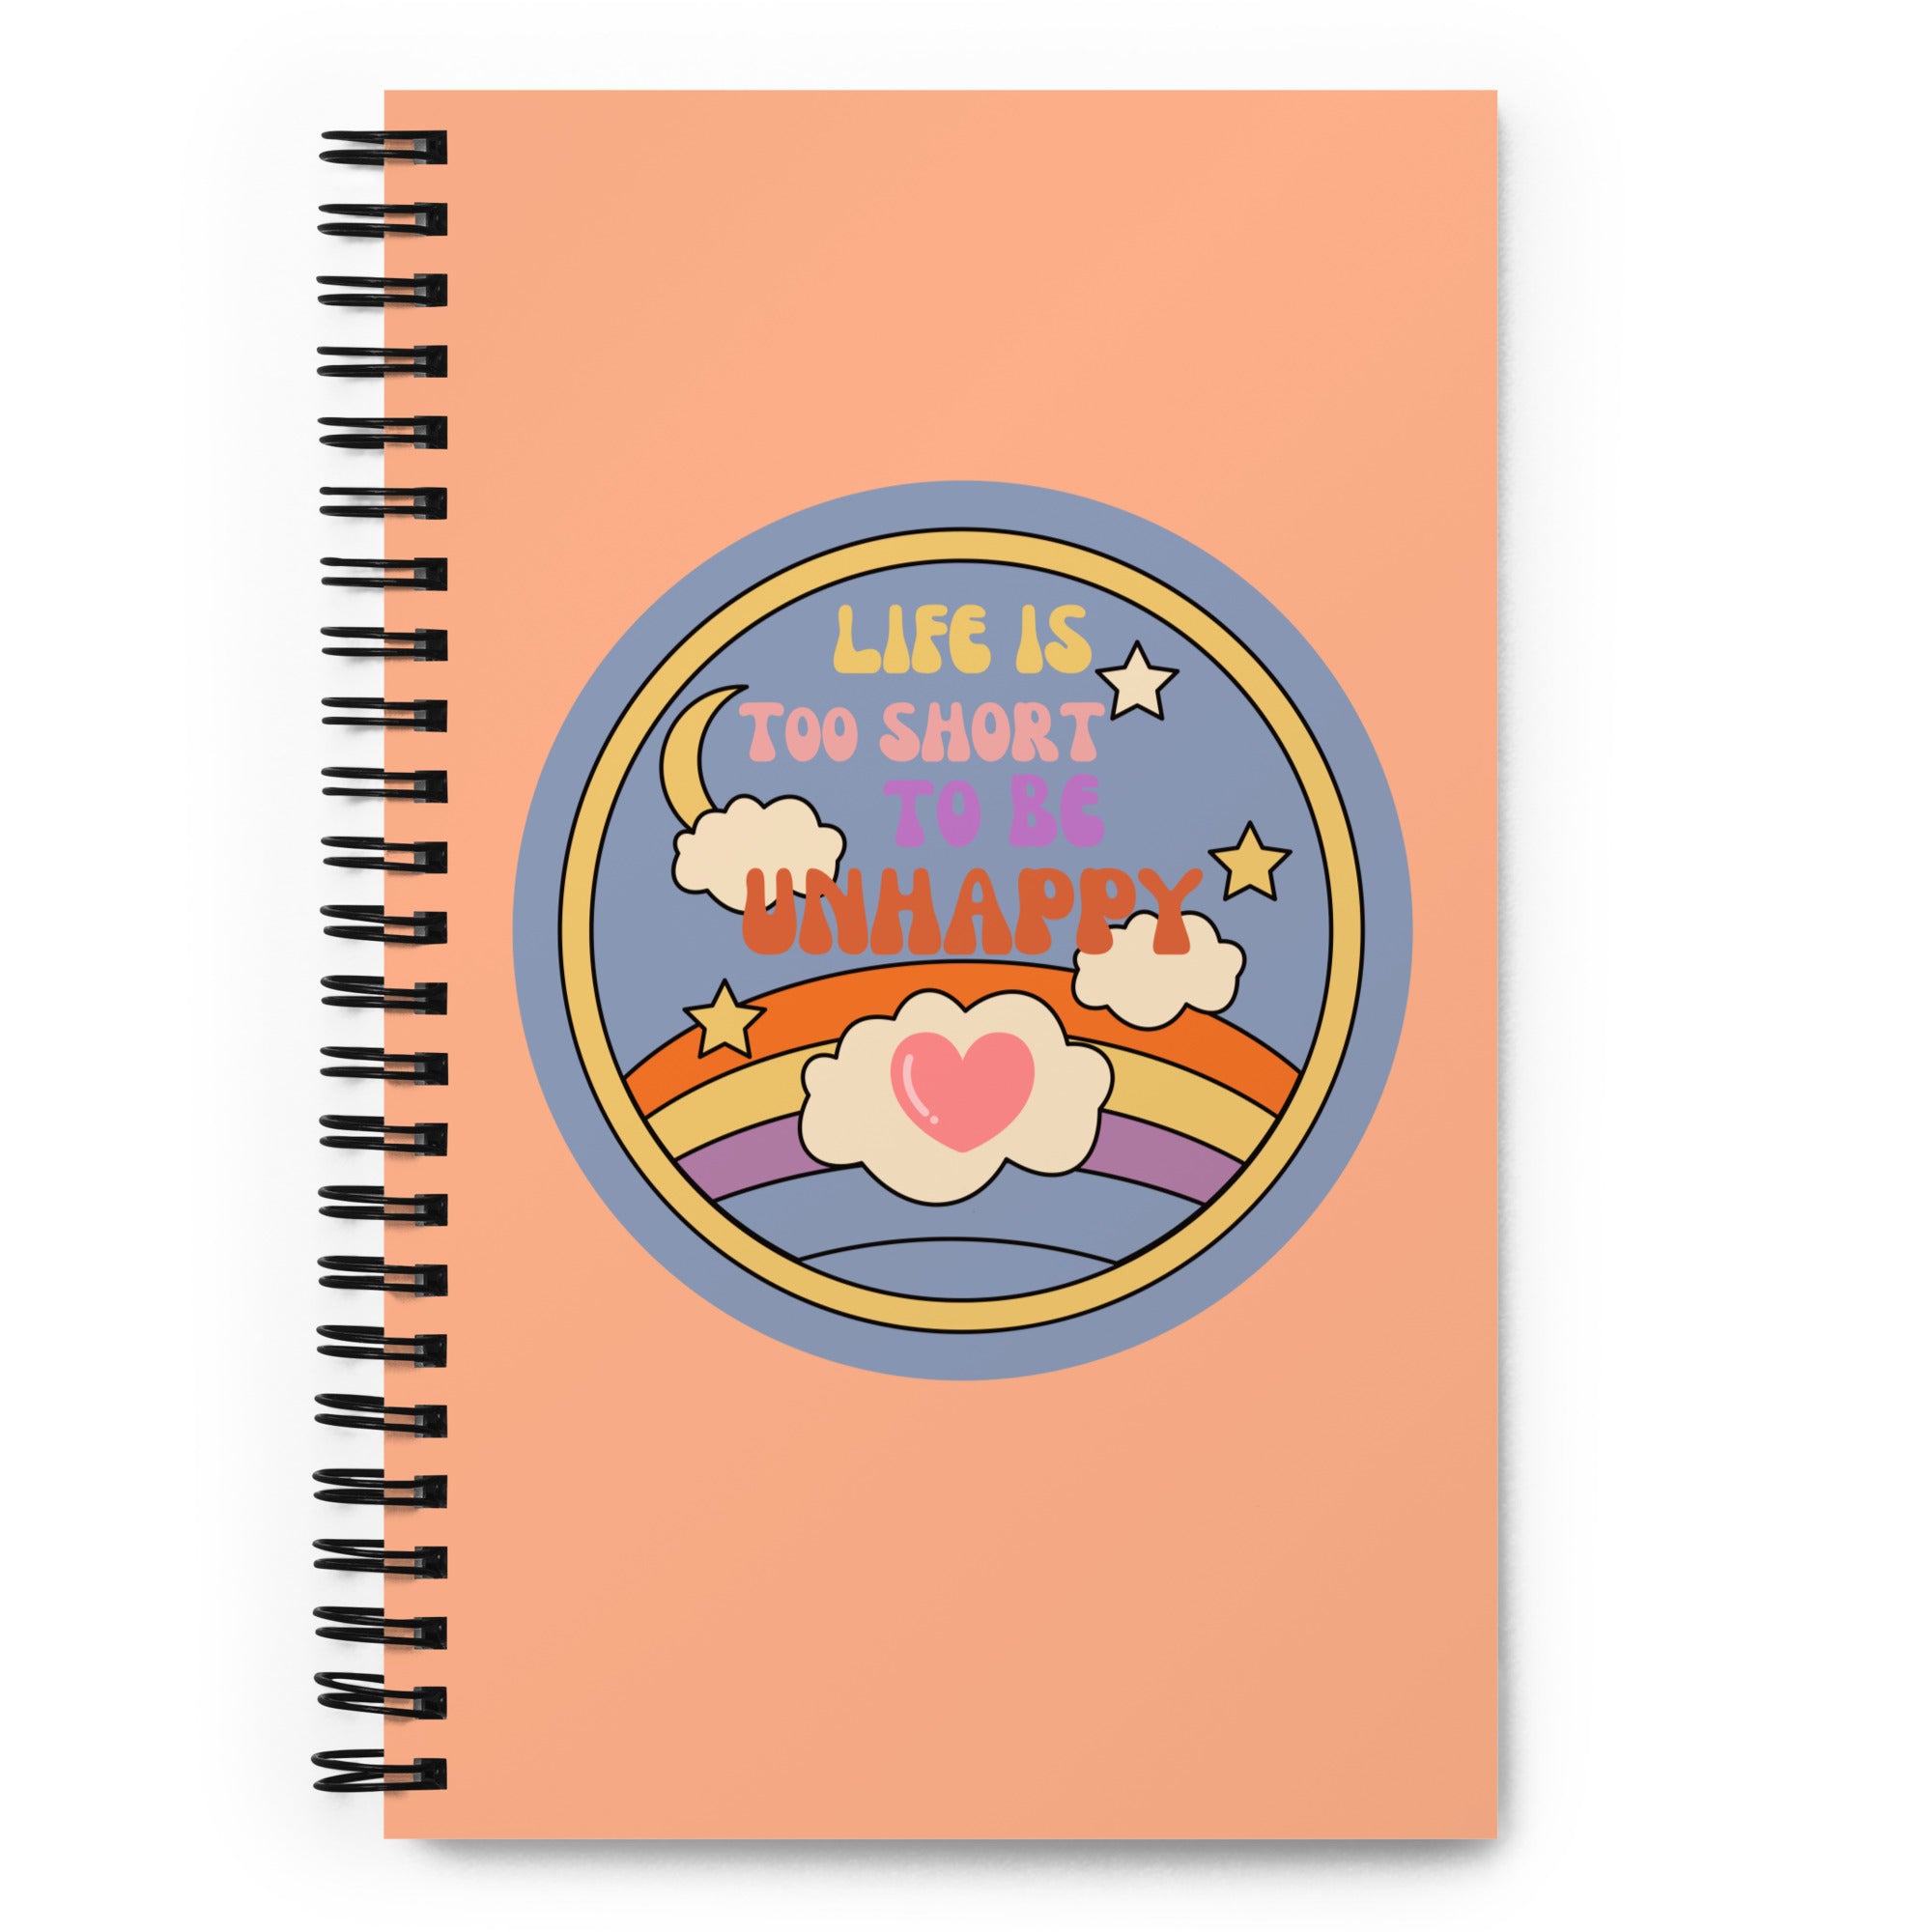 Life is Too Short Notebook